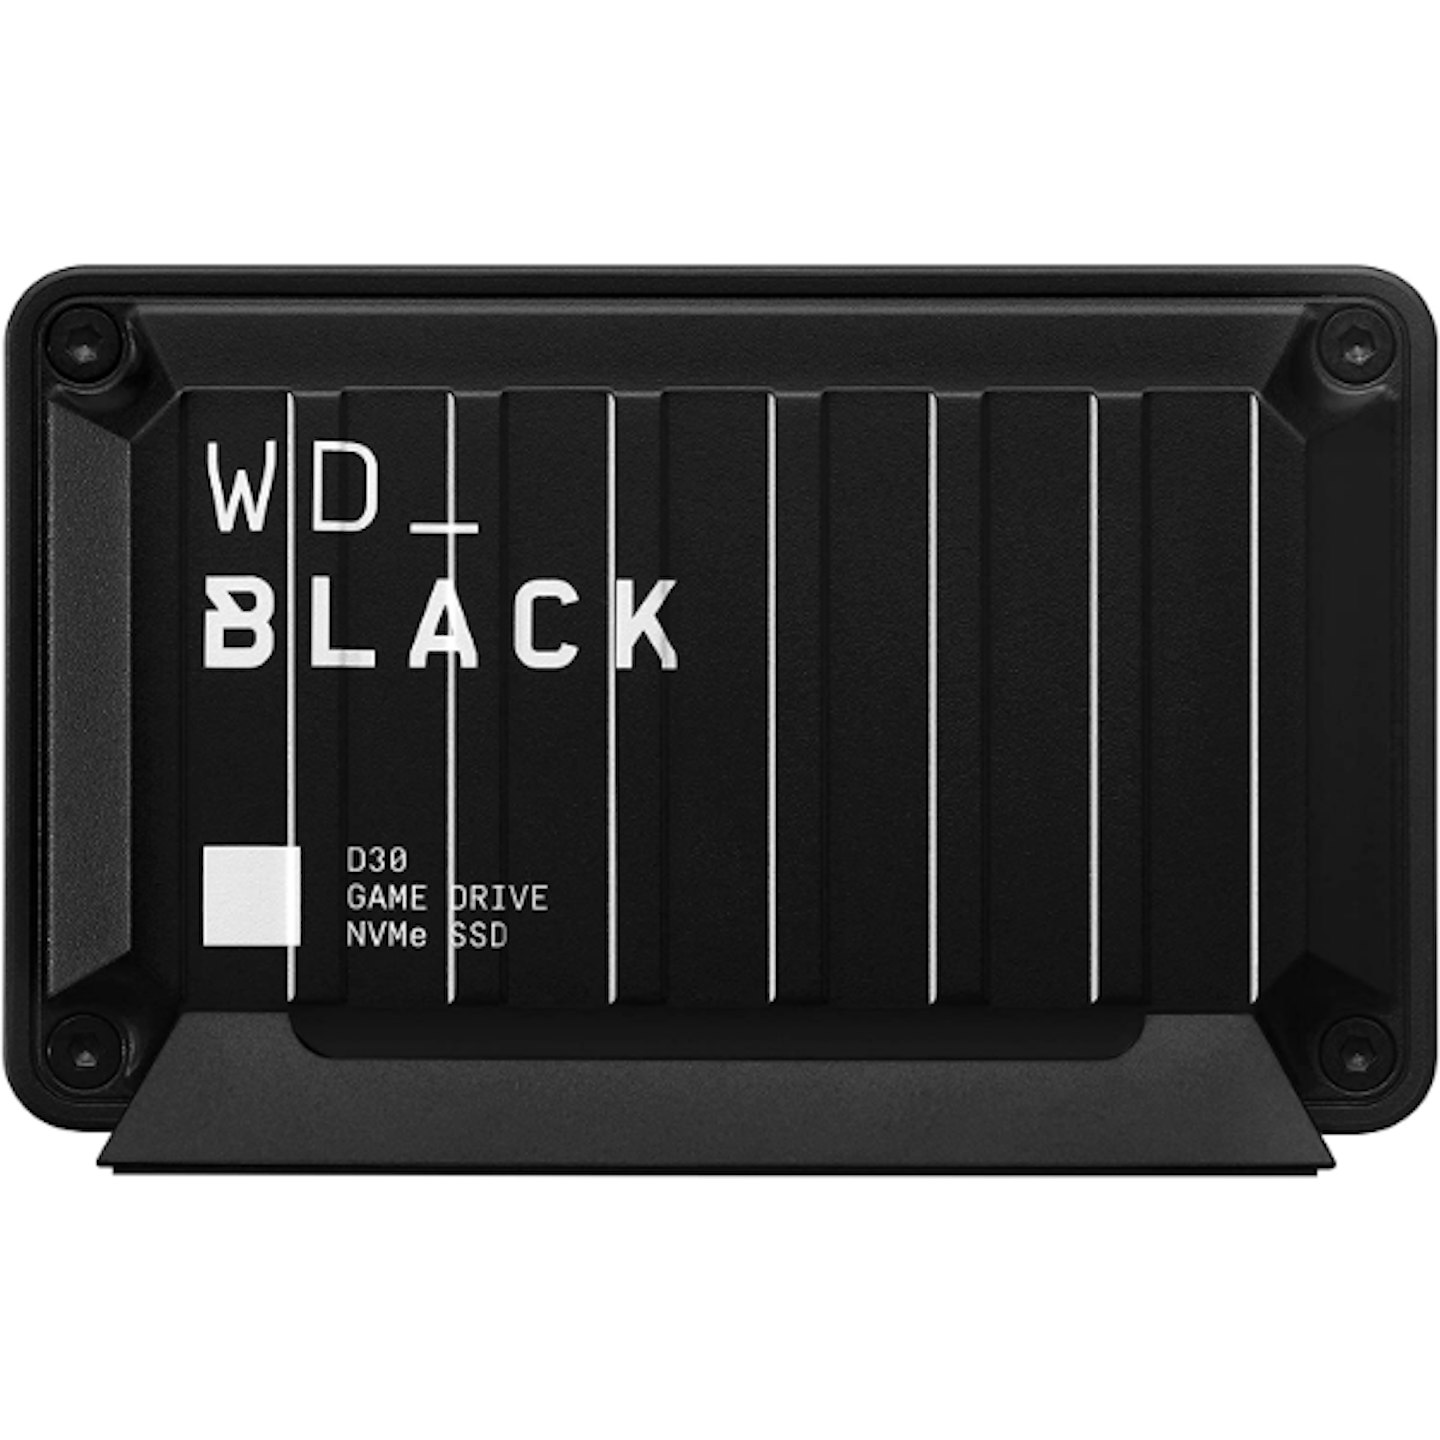 WD_Black D30 Game Drive